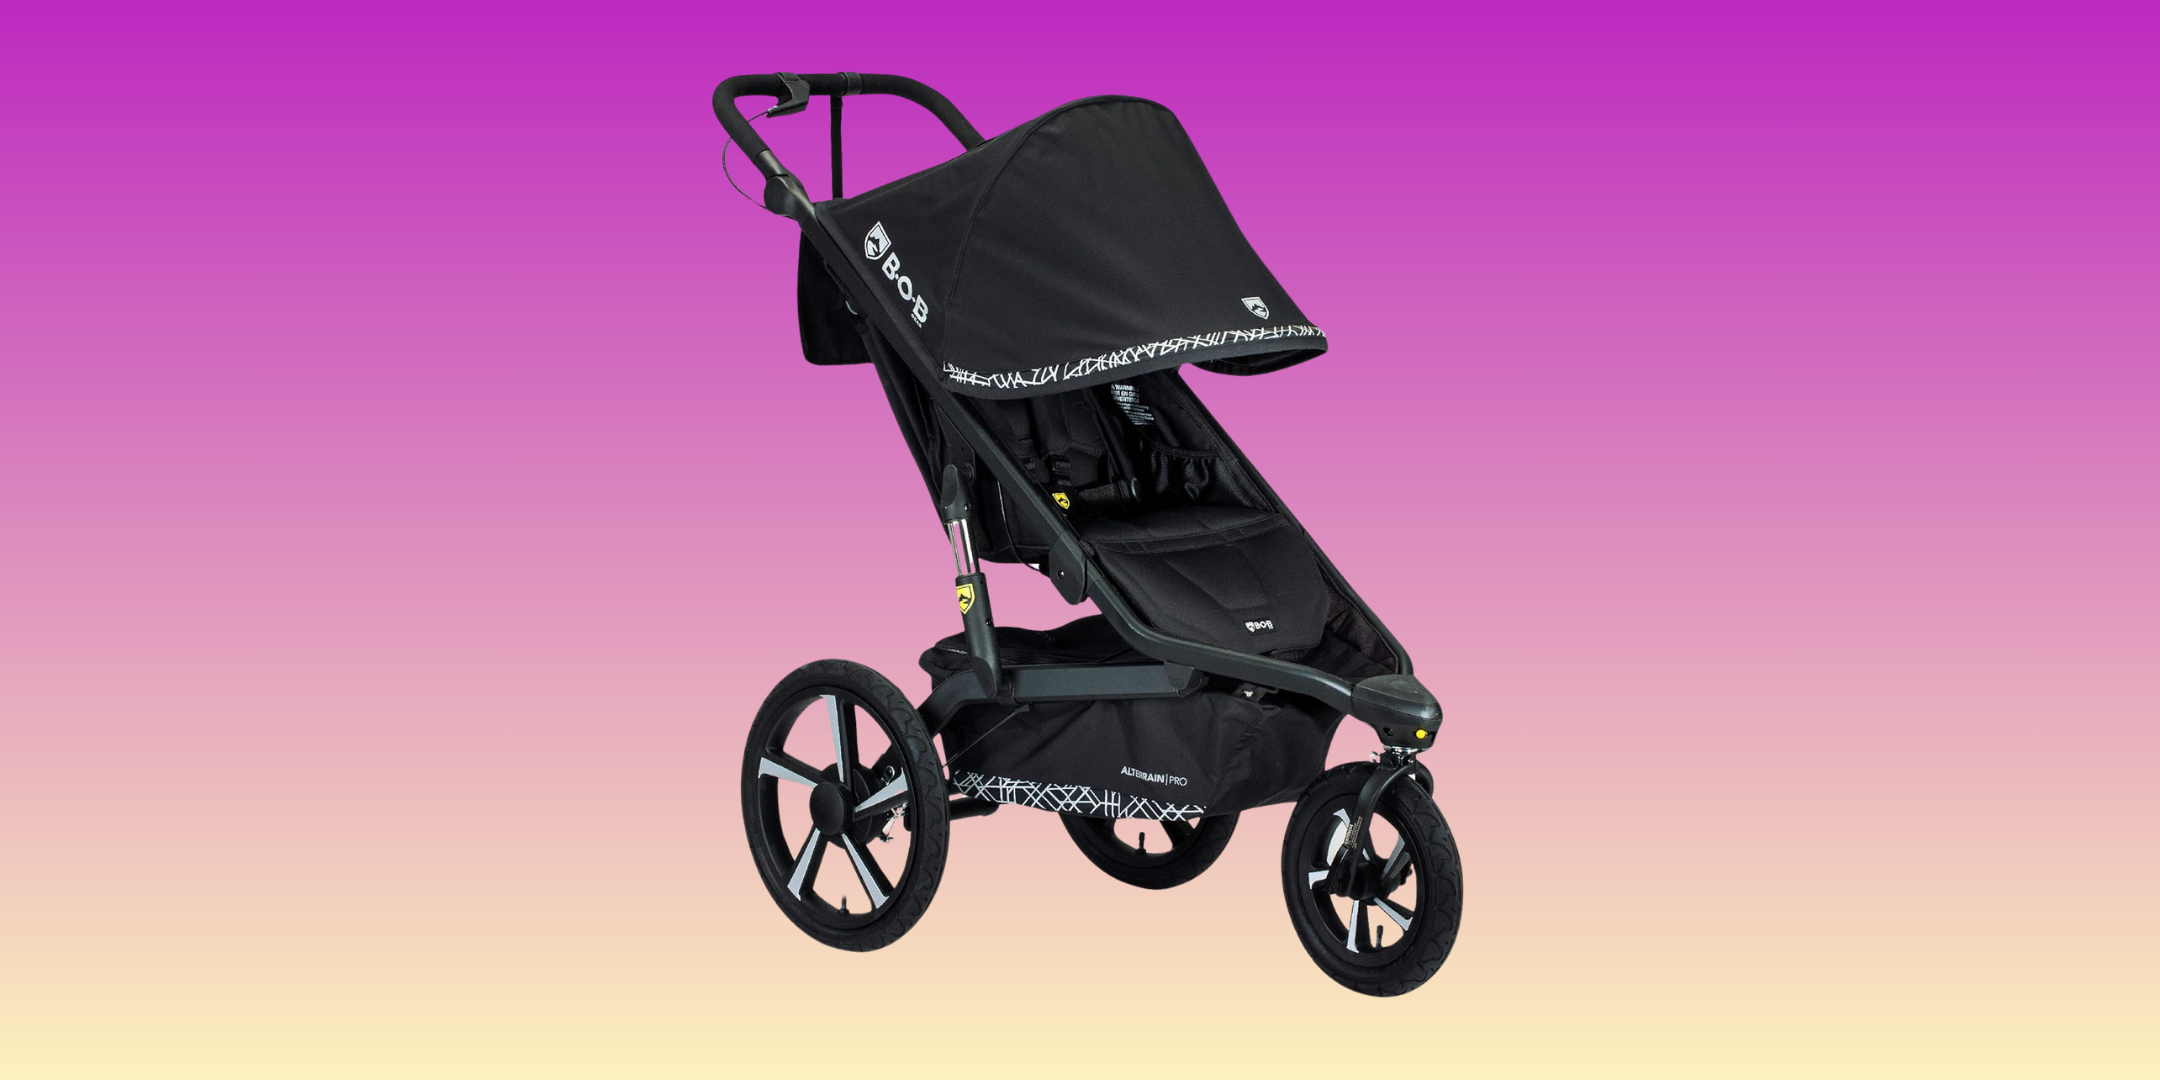 pink and yellow background with black stroller